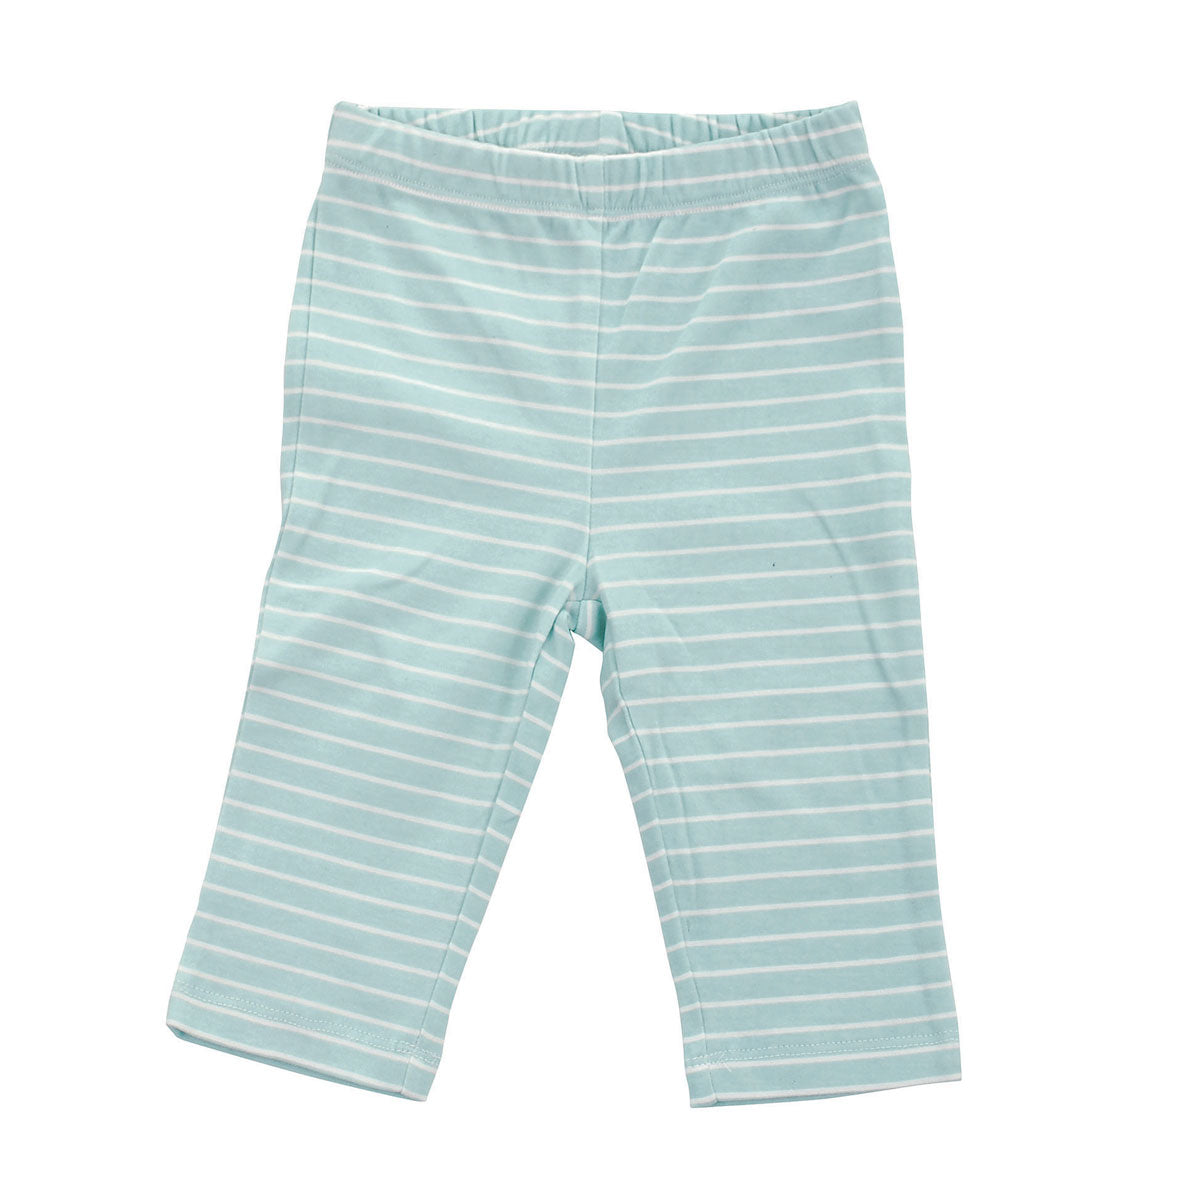 Pimfylm Cotton Baby Organic Cotton Terry Pants Blue 10-12 Years